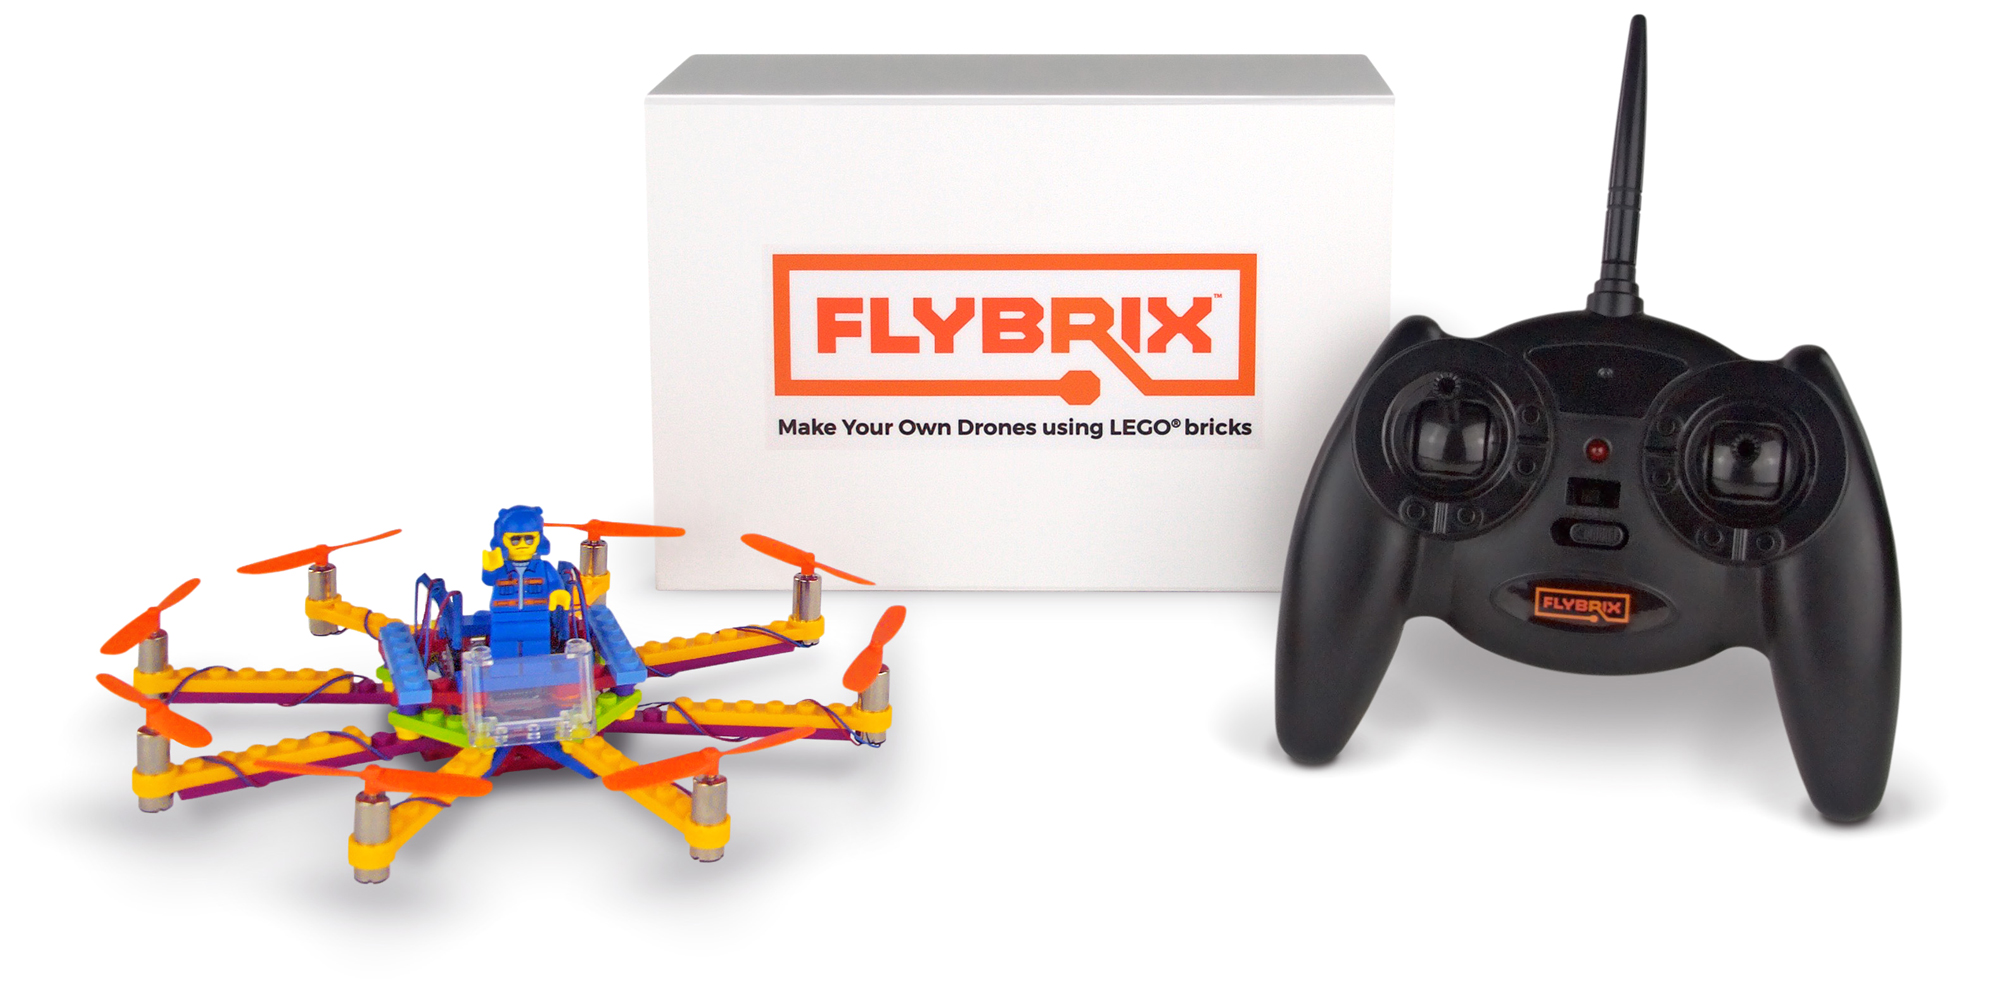 These Simple Kits Let You Build Flying Drones From LEGO